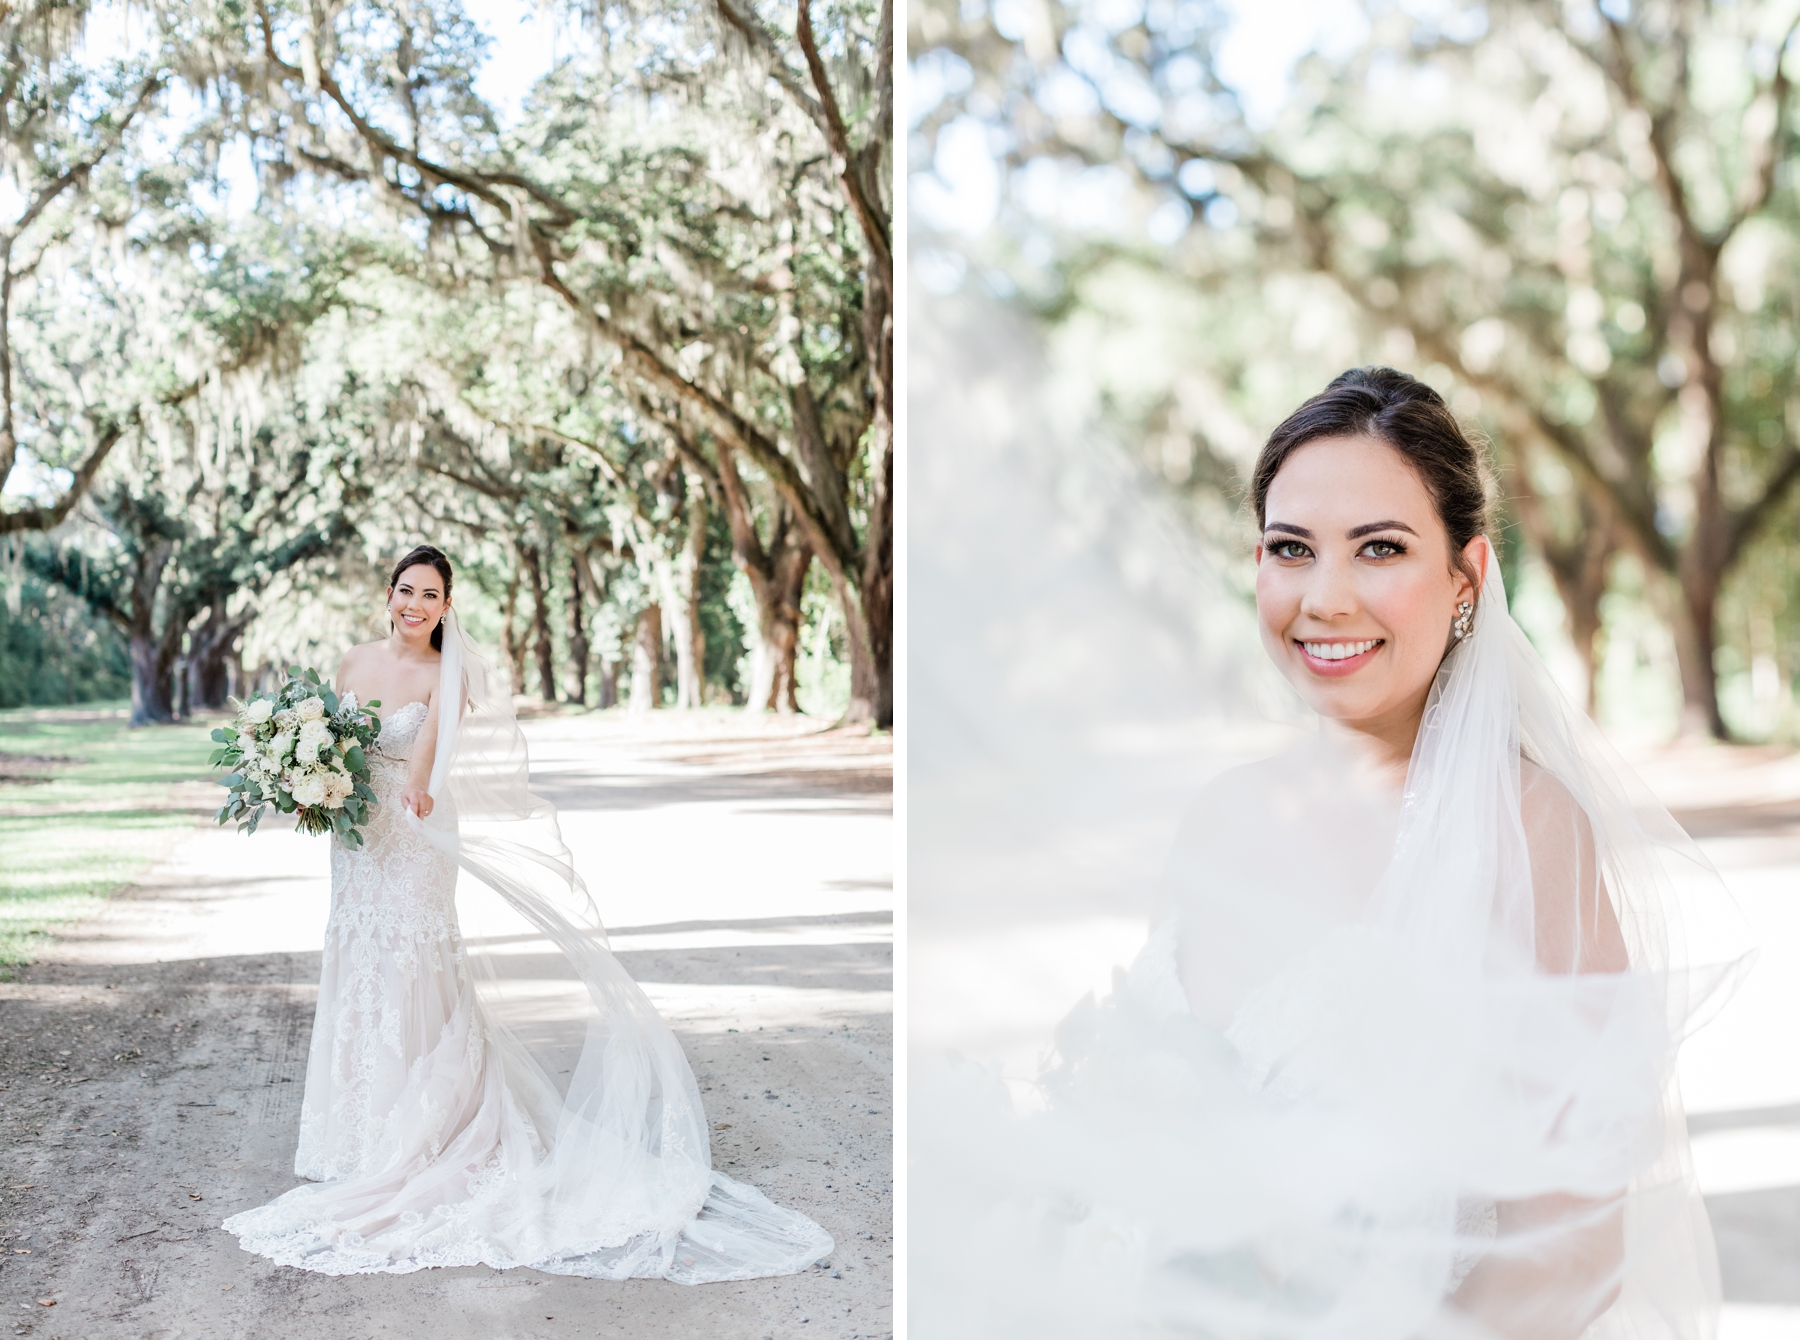 Breanna and Taylor’s Wormsloe Elopement by The Savannah Elopement Package